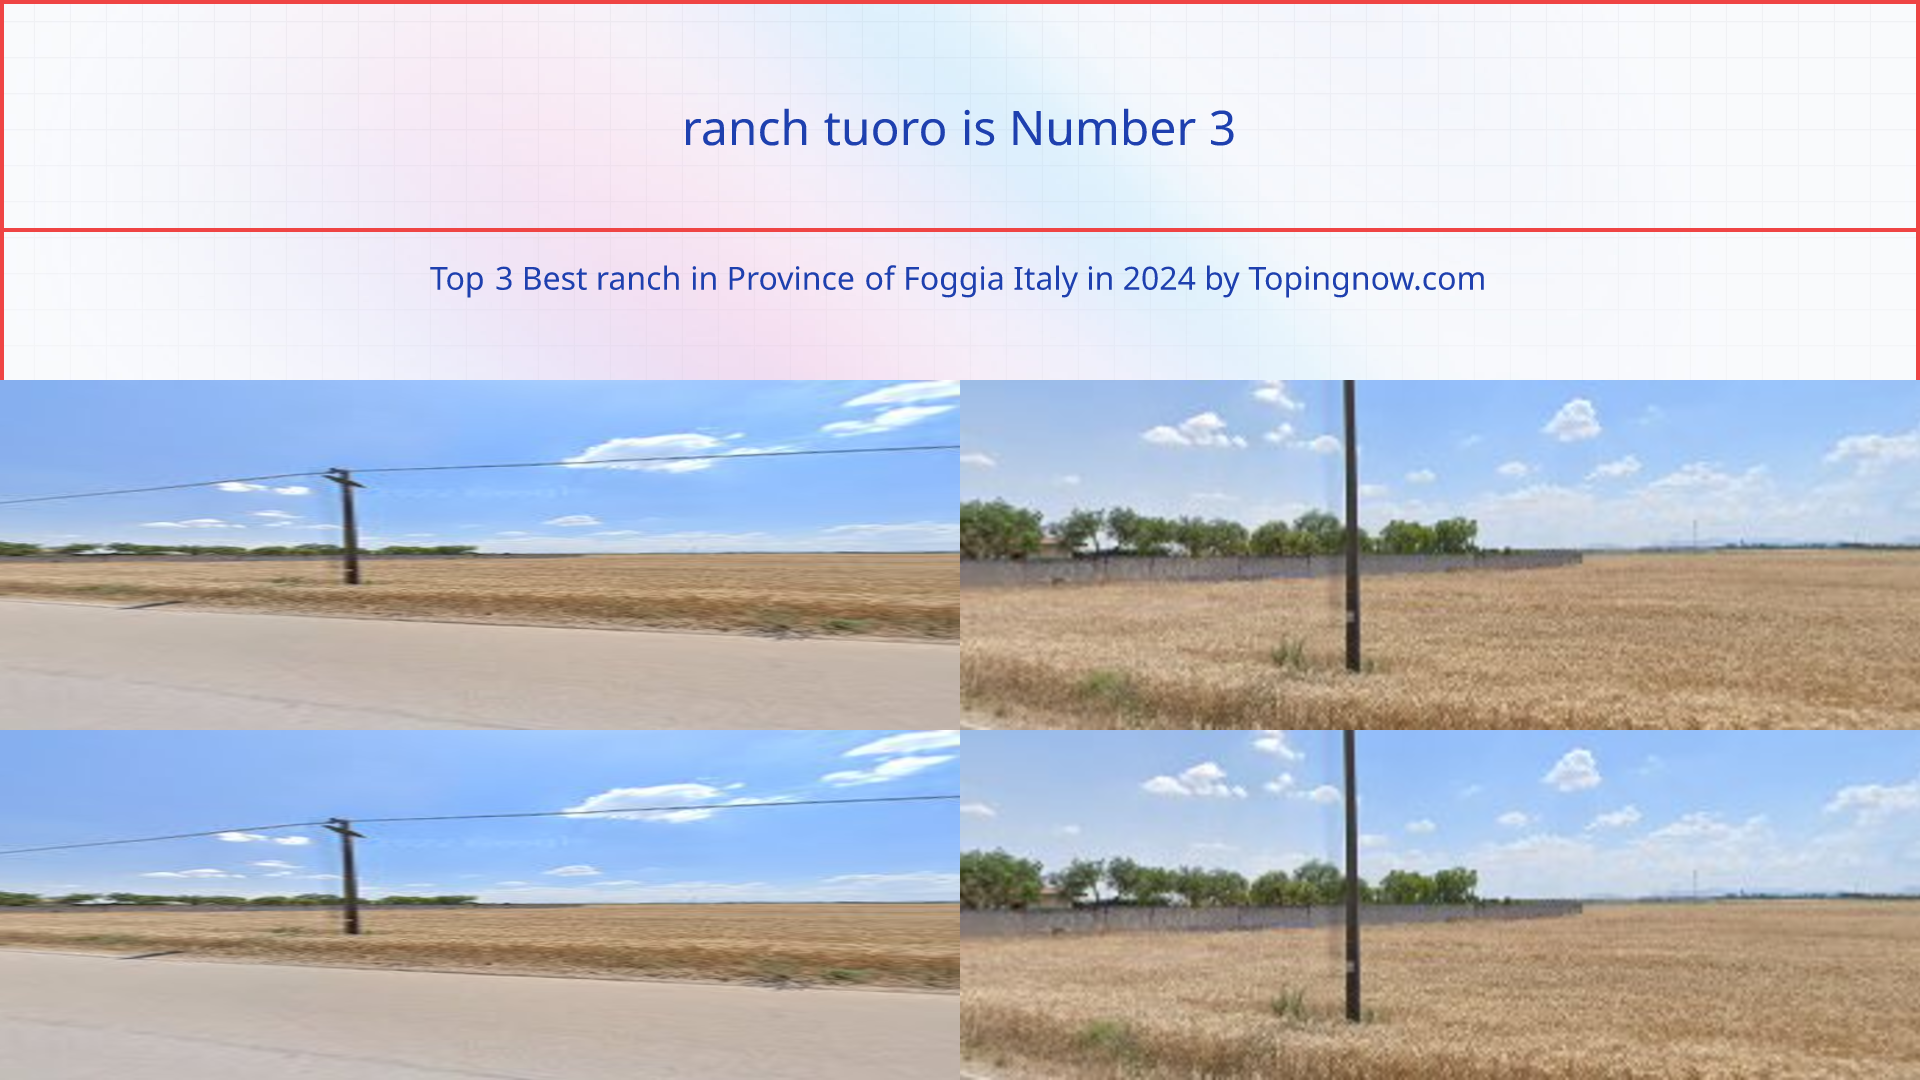 ranch tuoro: Top 3 Best ranch in Province of Foggia Italy in 2024